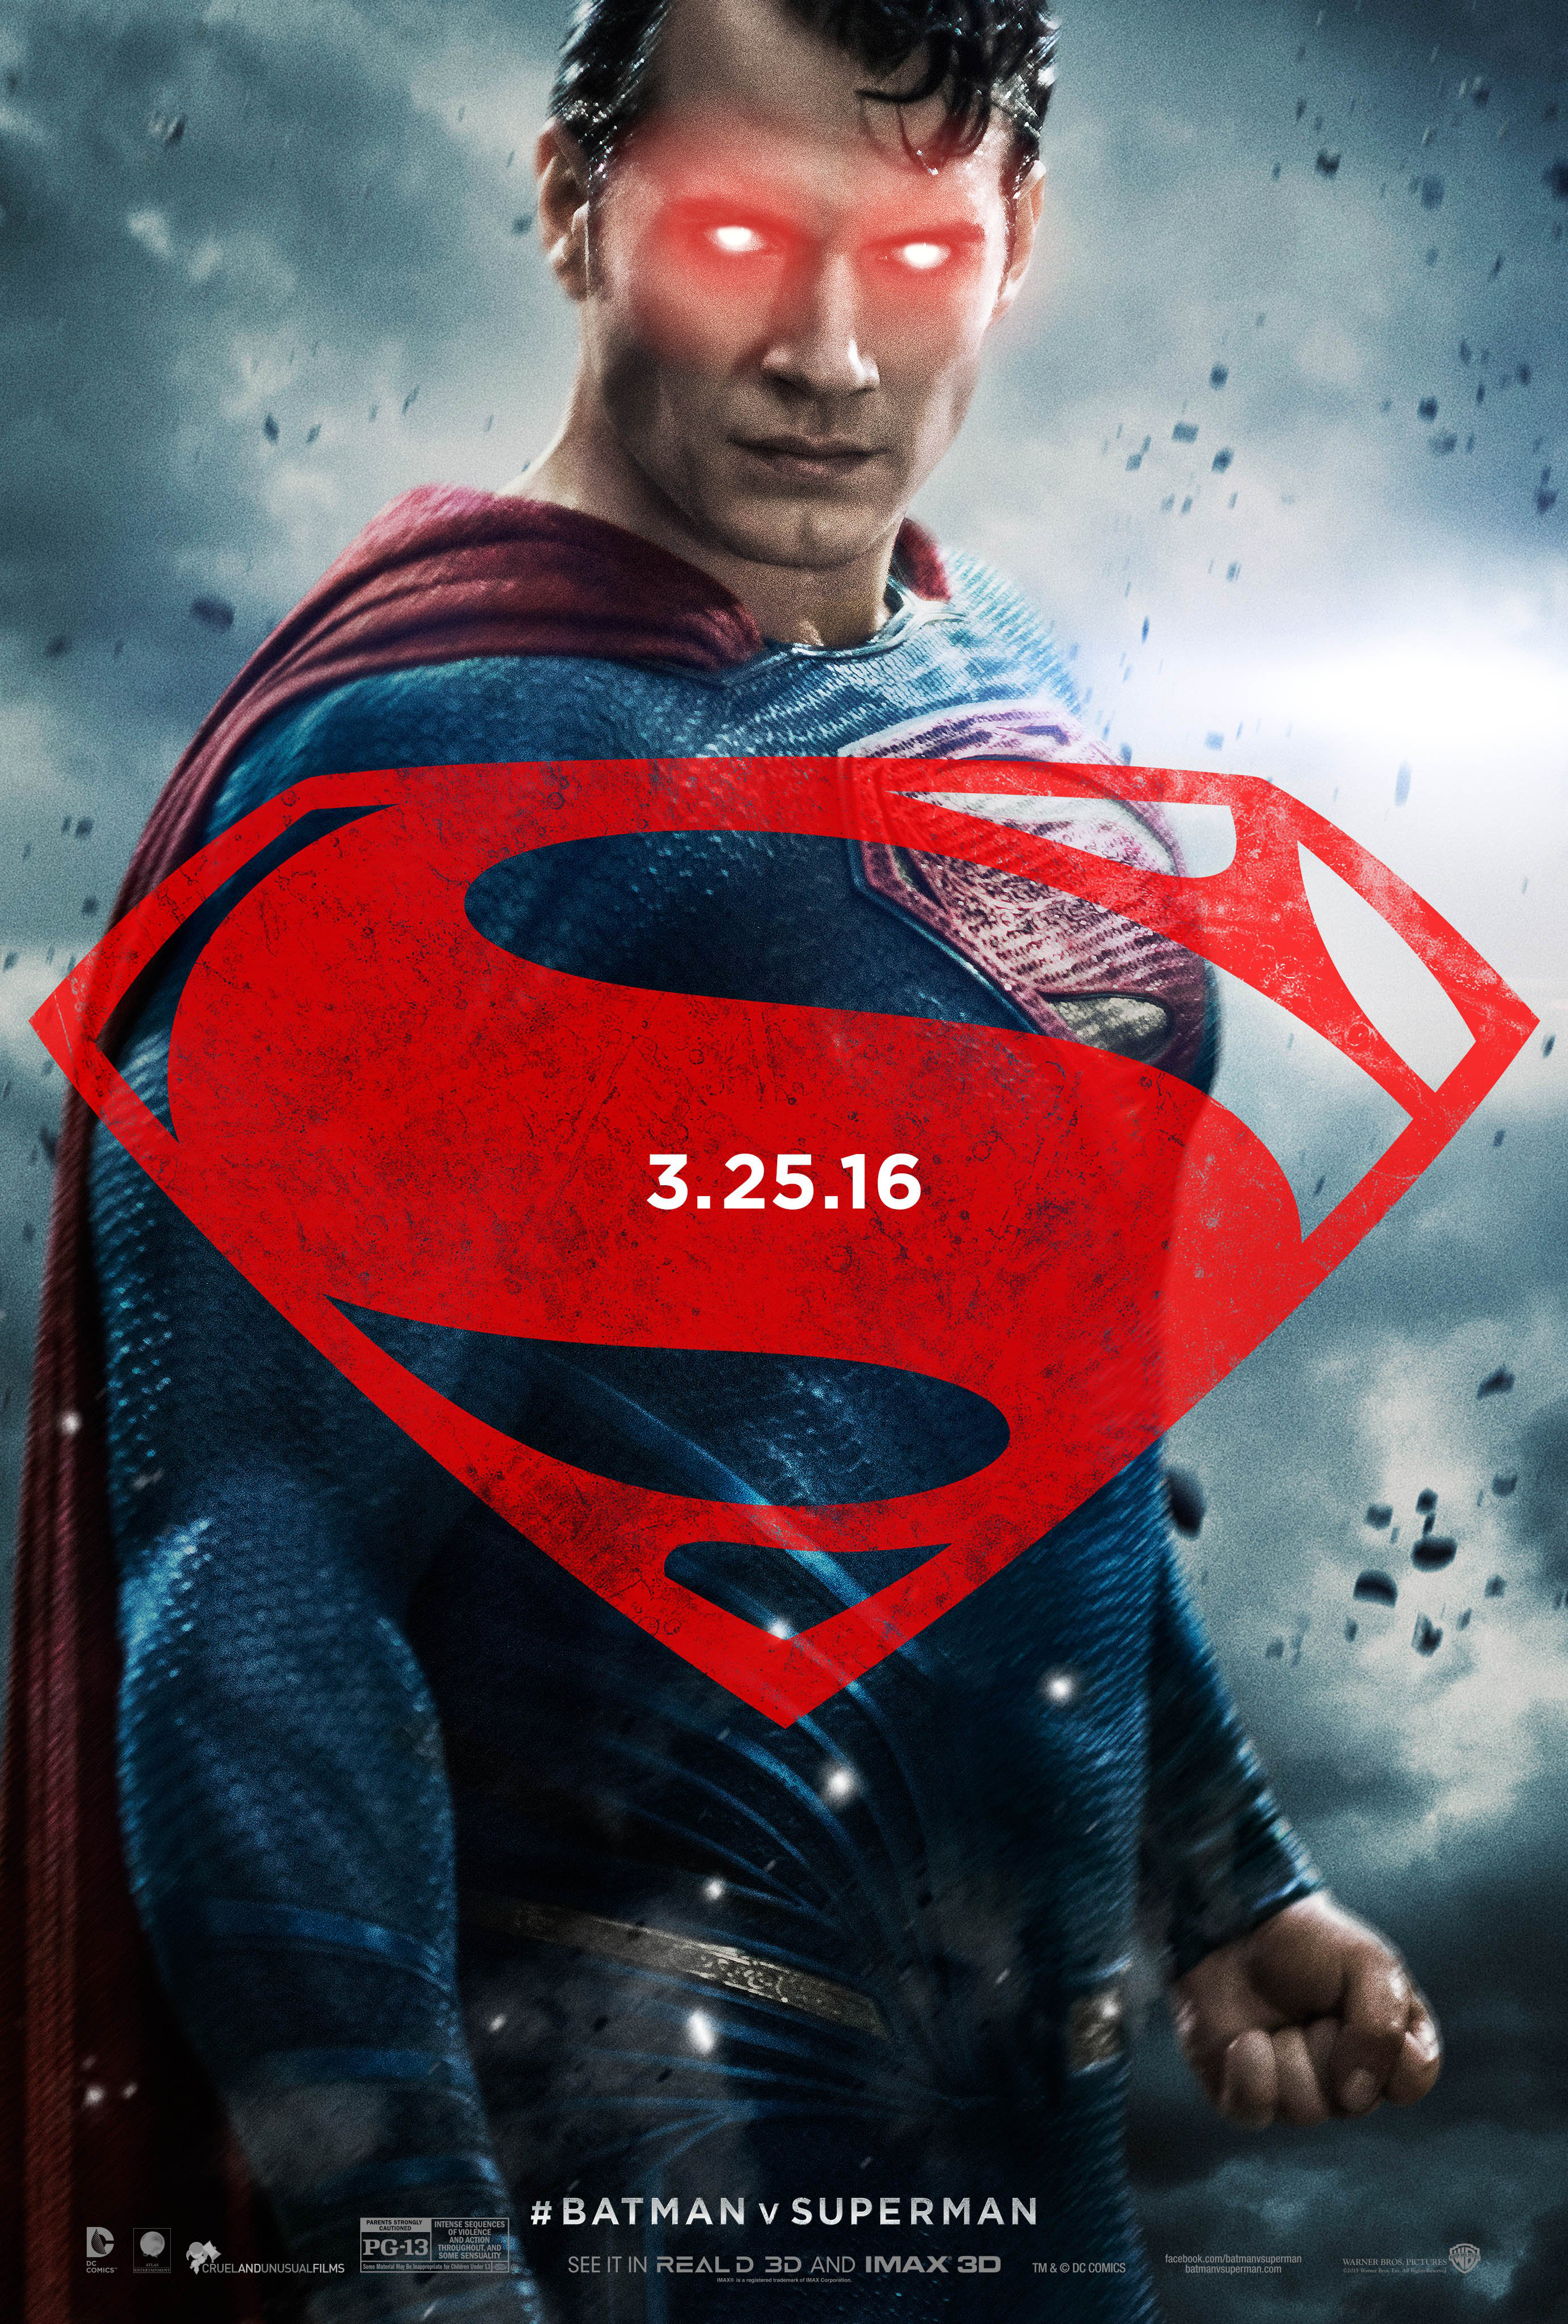 Man of Steel Theatrical Movie Poster by YoungPhoenix3191 on DeviantArt